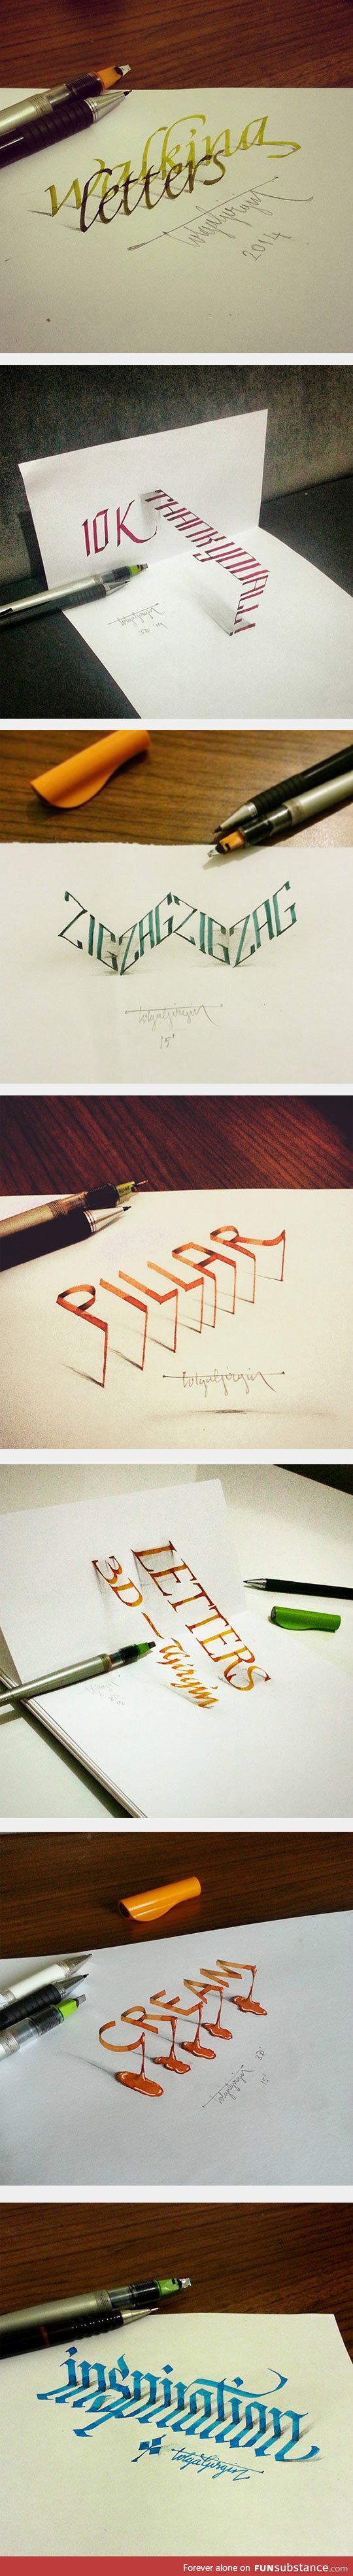 Amazing examples of anamorphic lettering